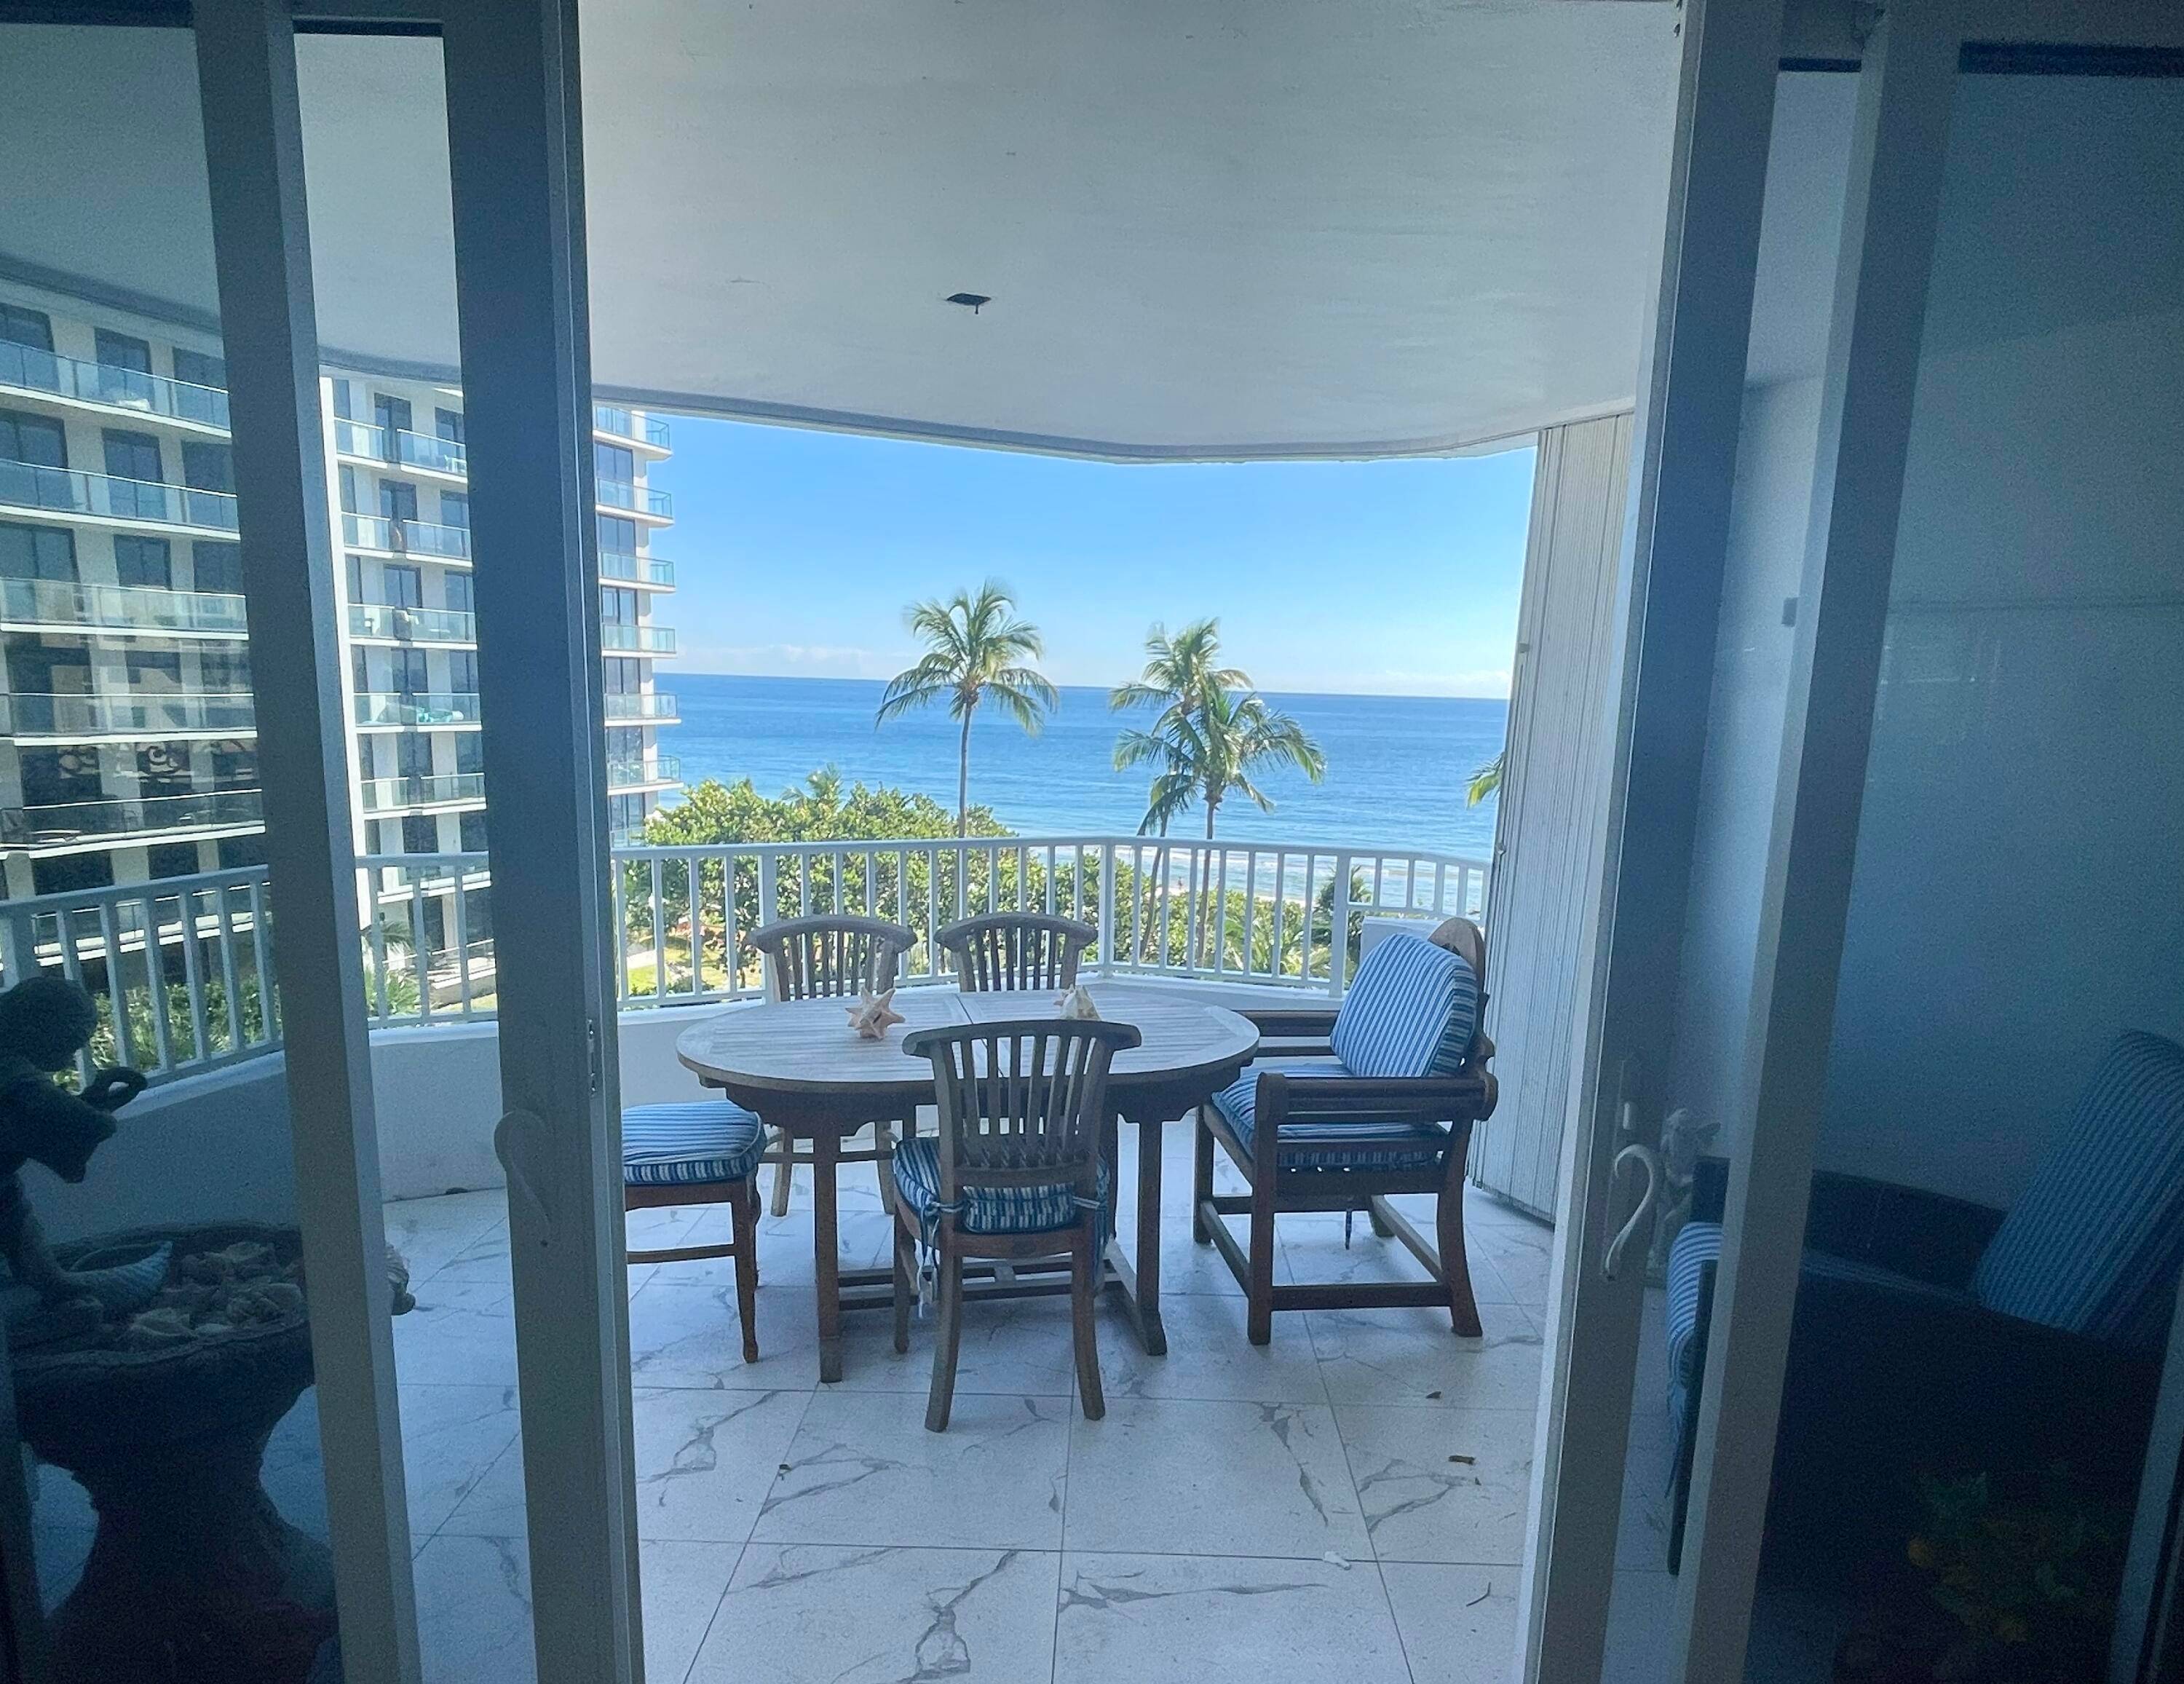 OCEAN VIEWS ! Residence 507 is a beautiful, spacious, move in ready, oceanfront, 2 bedroom, 2 bathroom, plus den, corner unit with an extra large covered balcony directly facing the ...